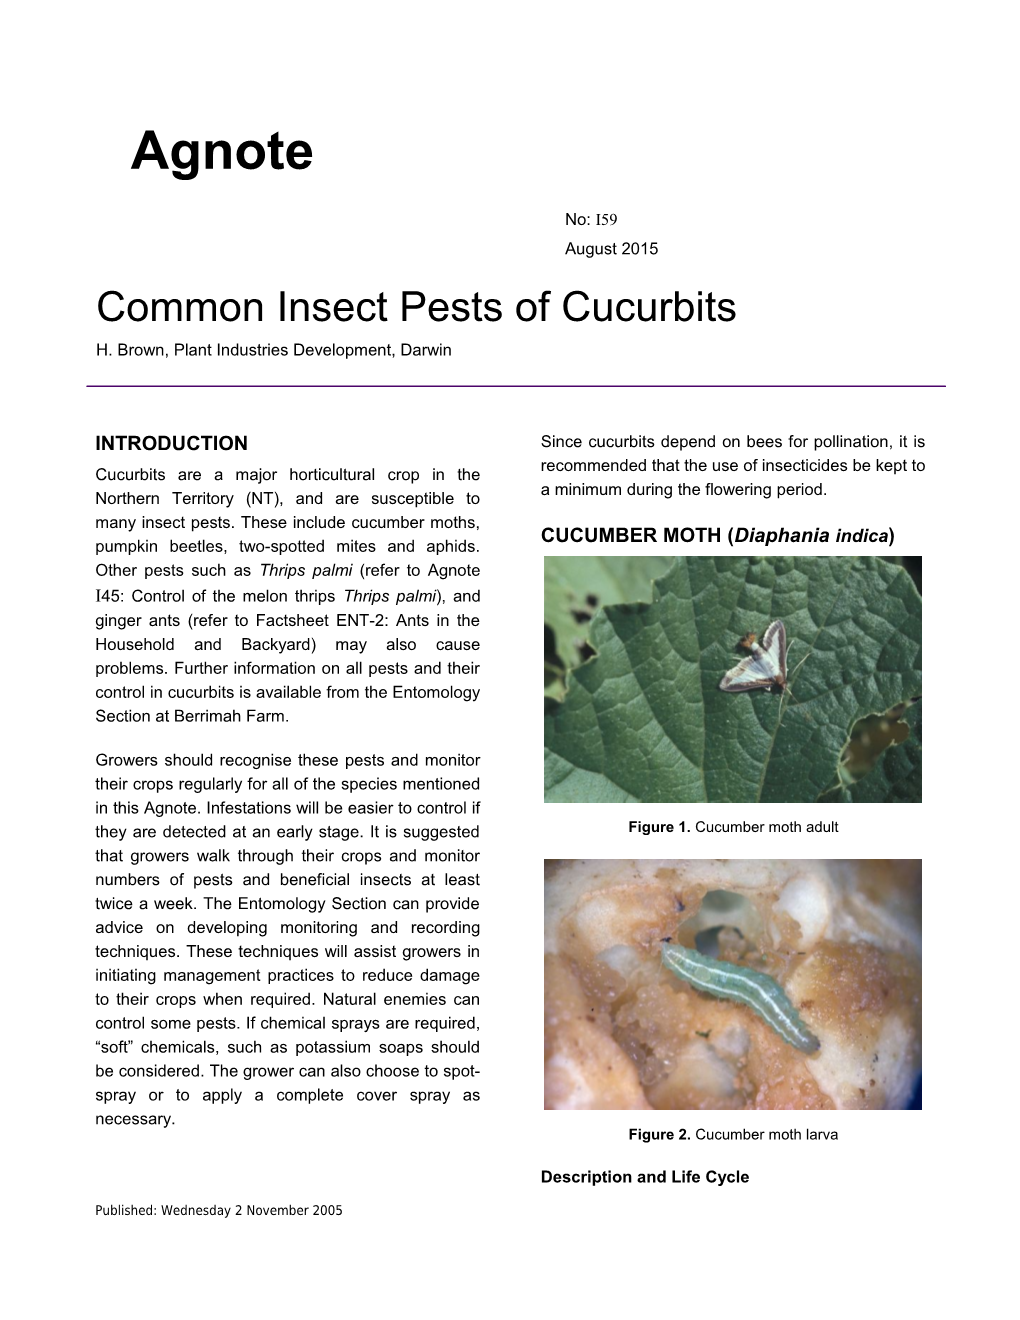 Common Insect Pests of Cucurbits